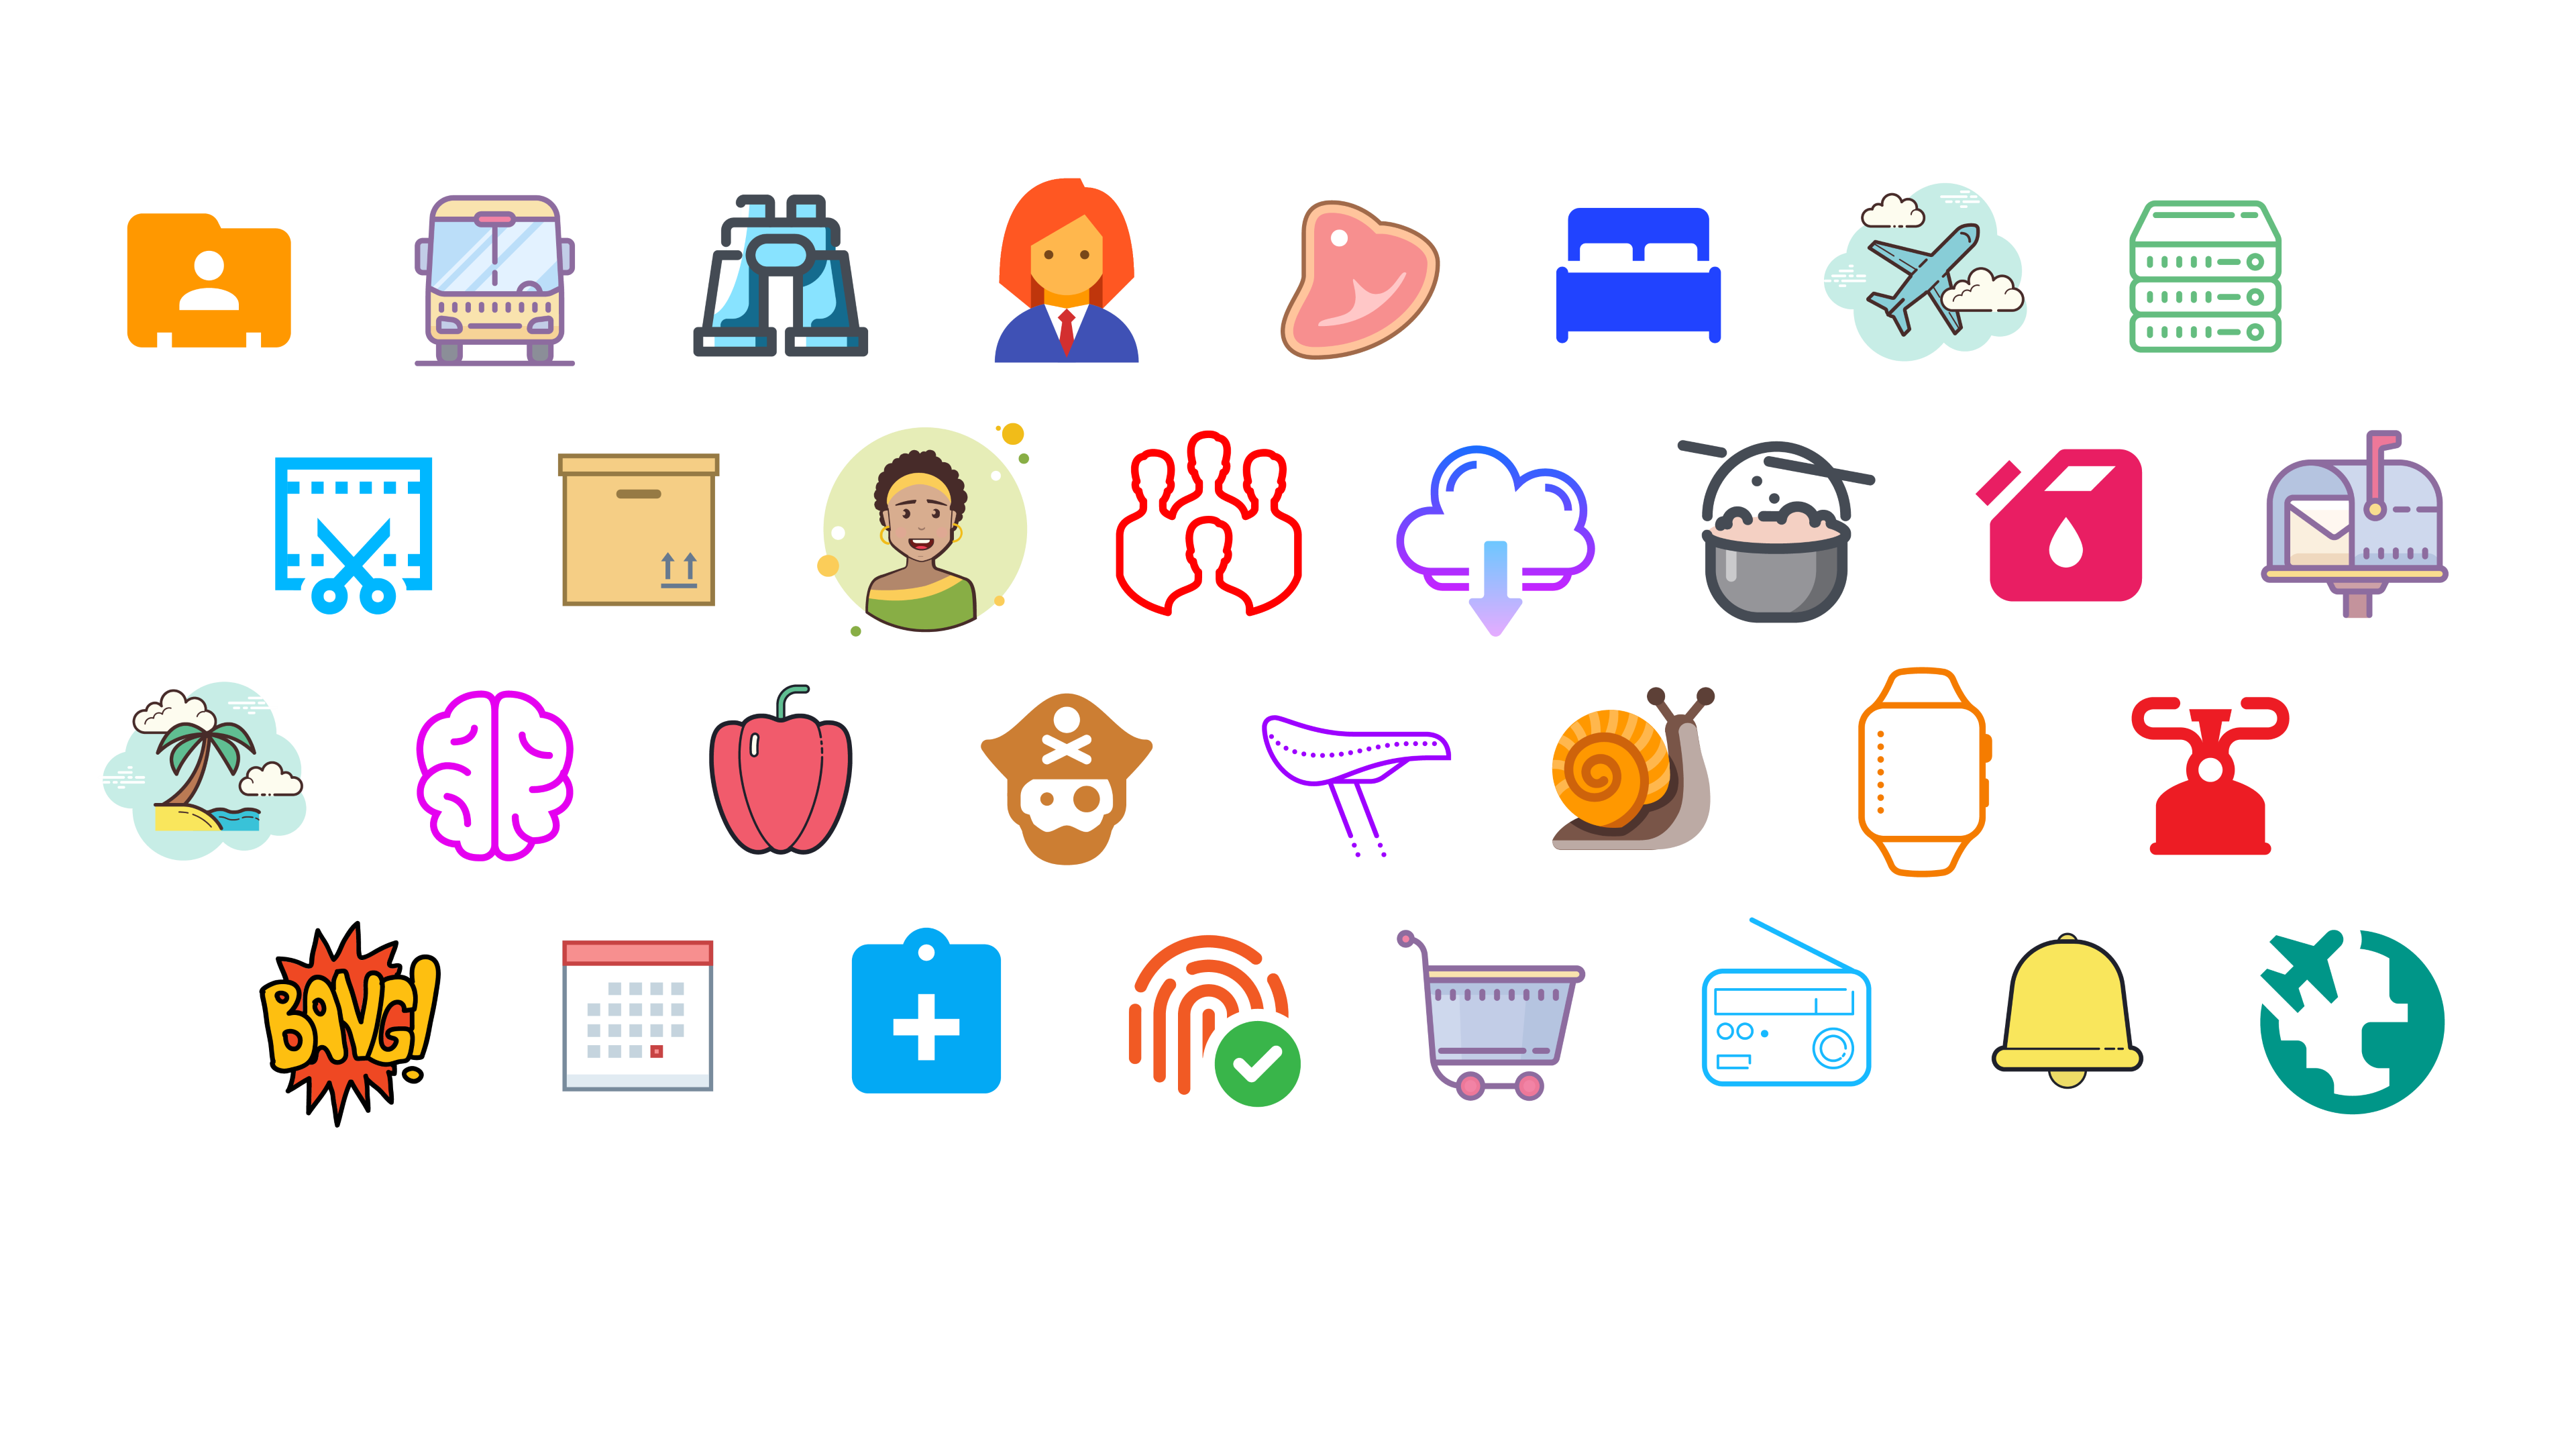 Download free icons for windows dirty emoji free download